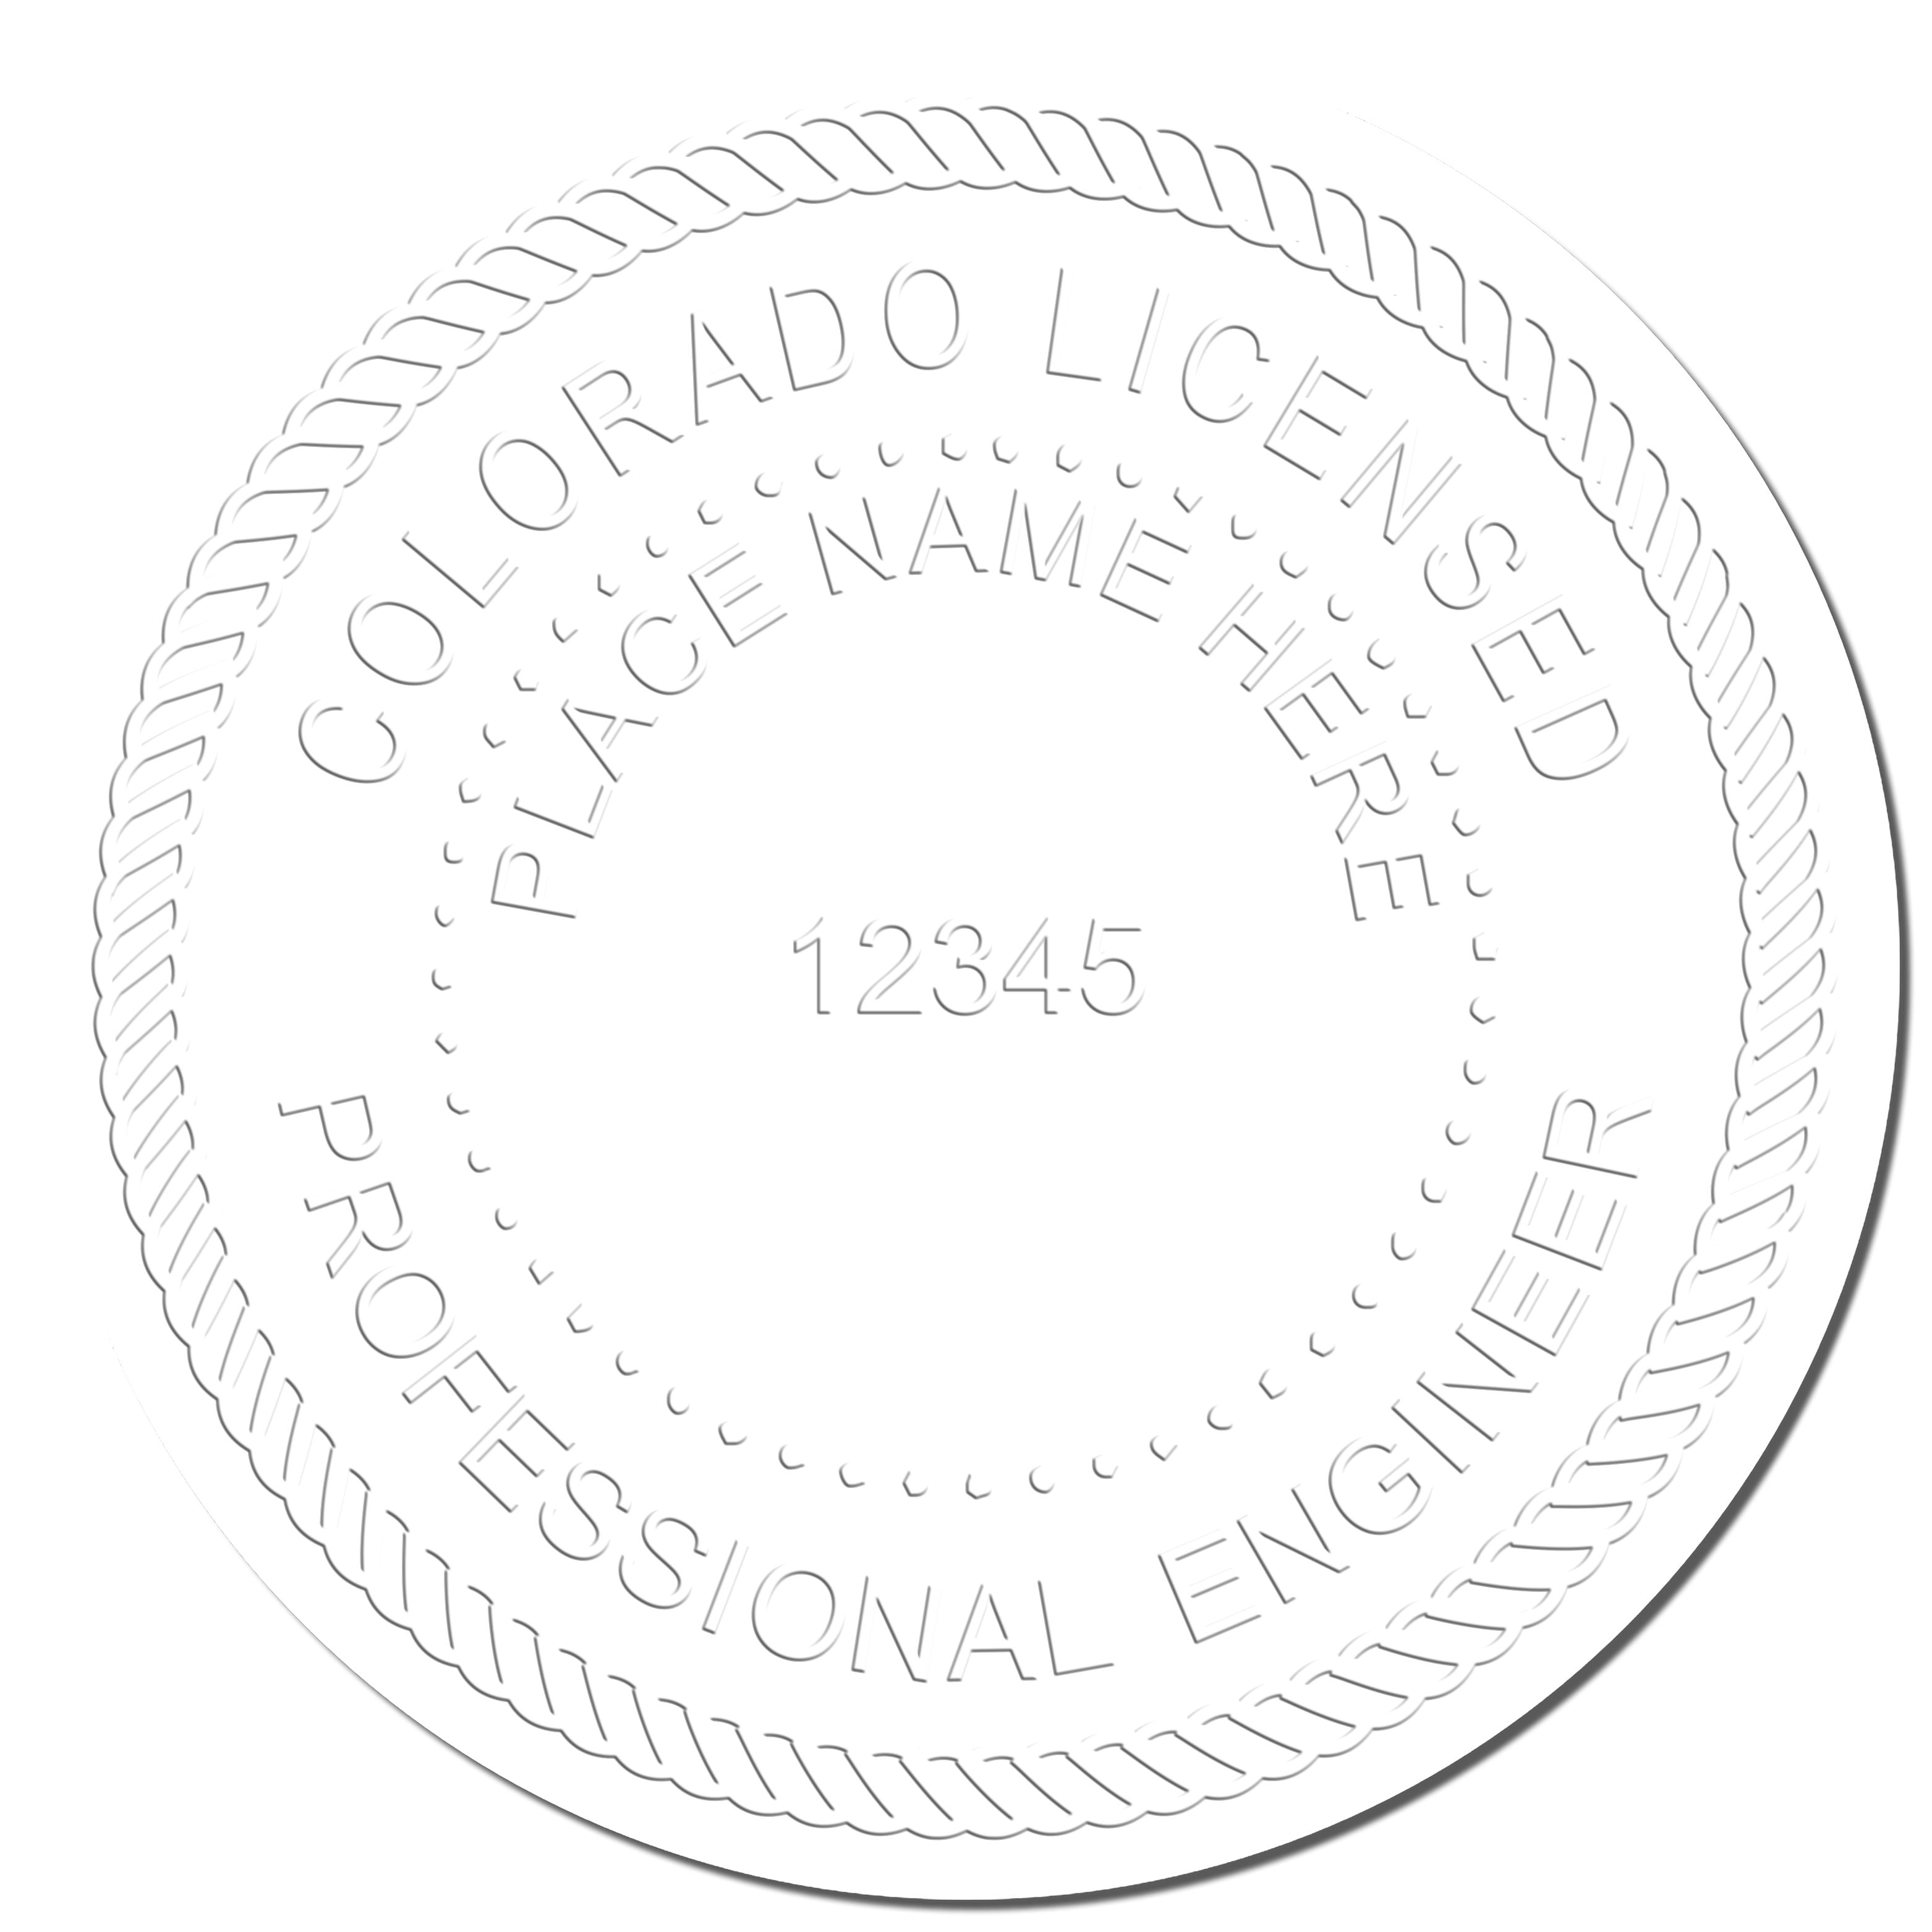 This paper is stamped with a sample imprint of the State of Colorado Extended Long Reach Engineer Seal, signifying its quality and reliability.